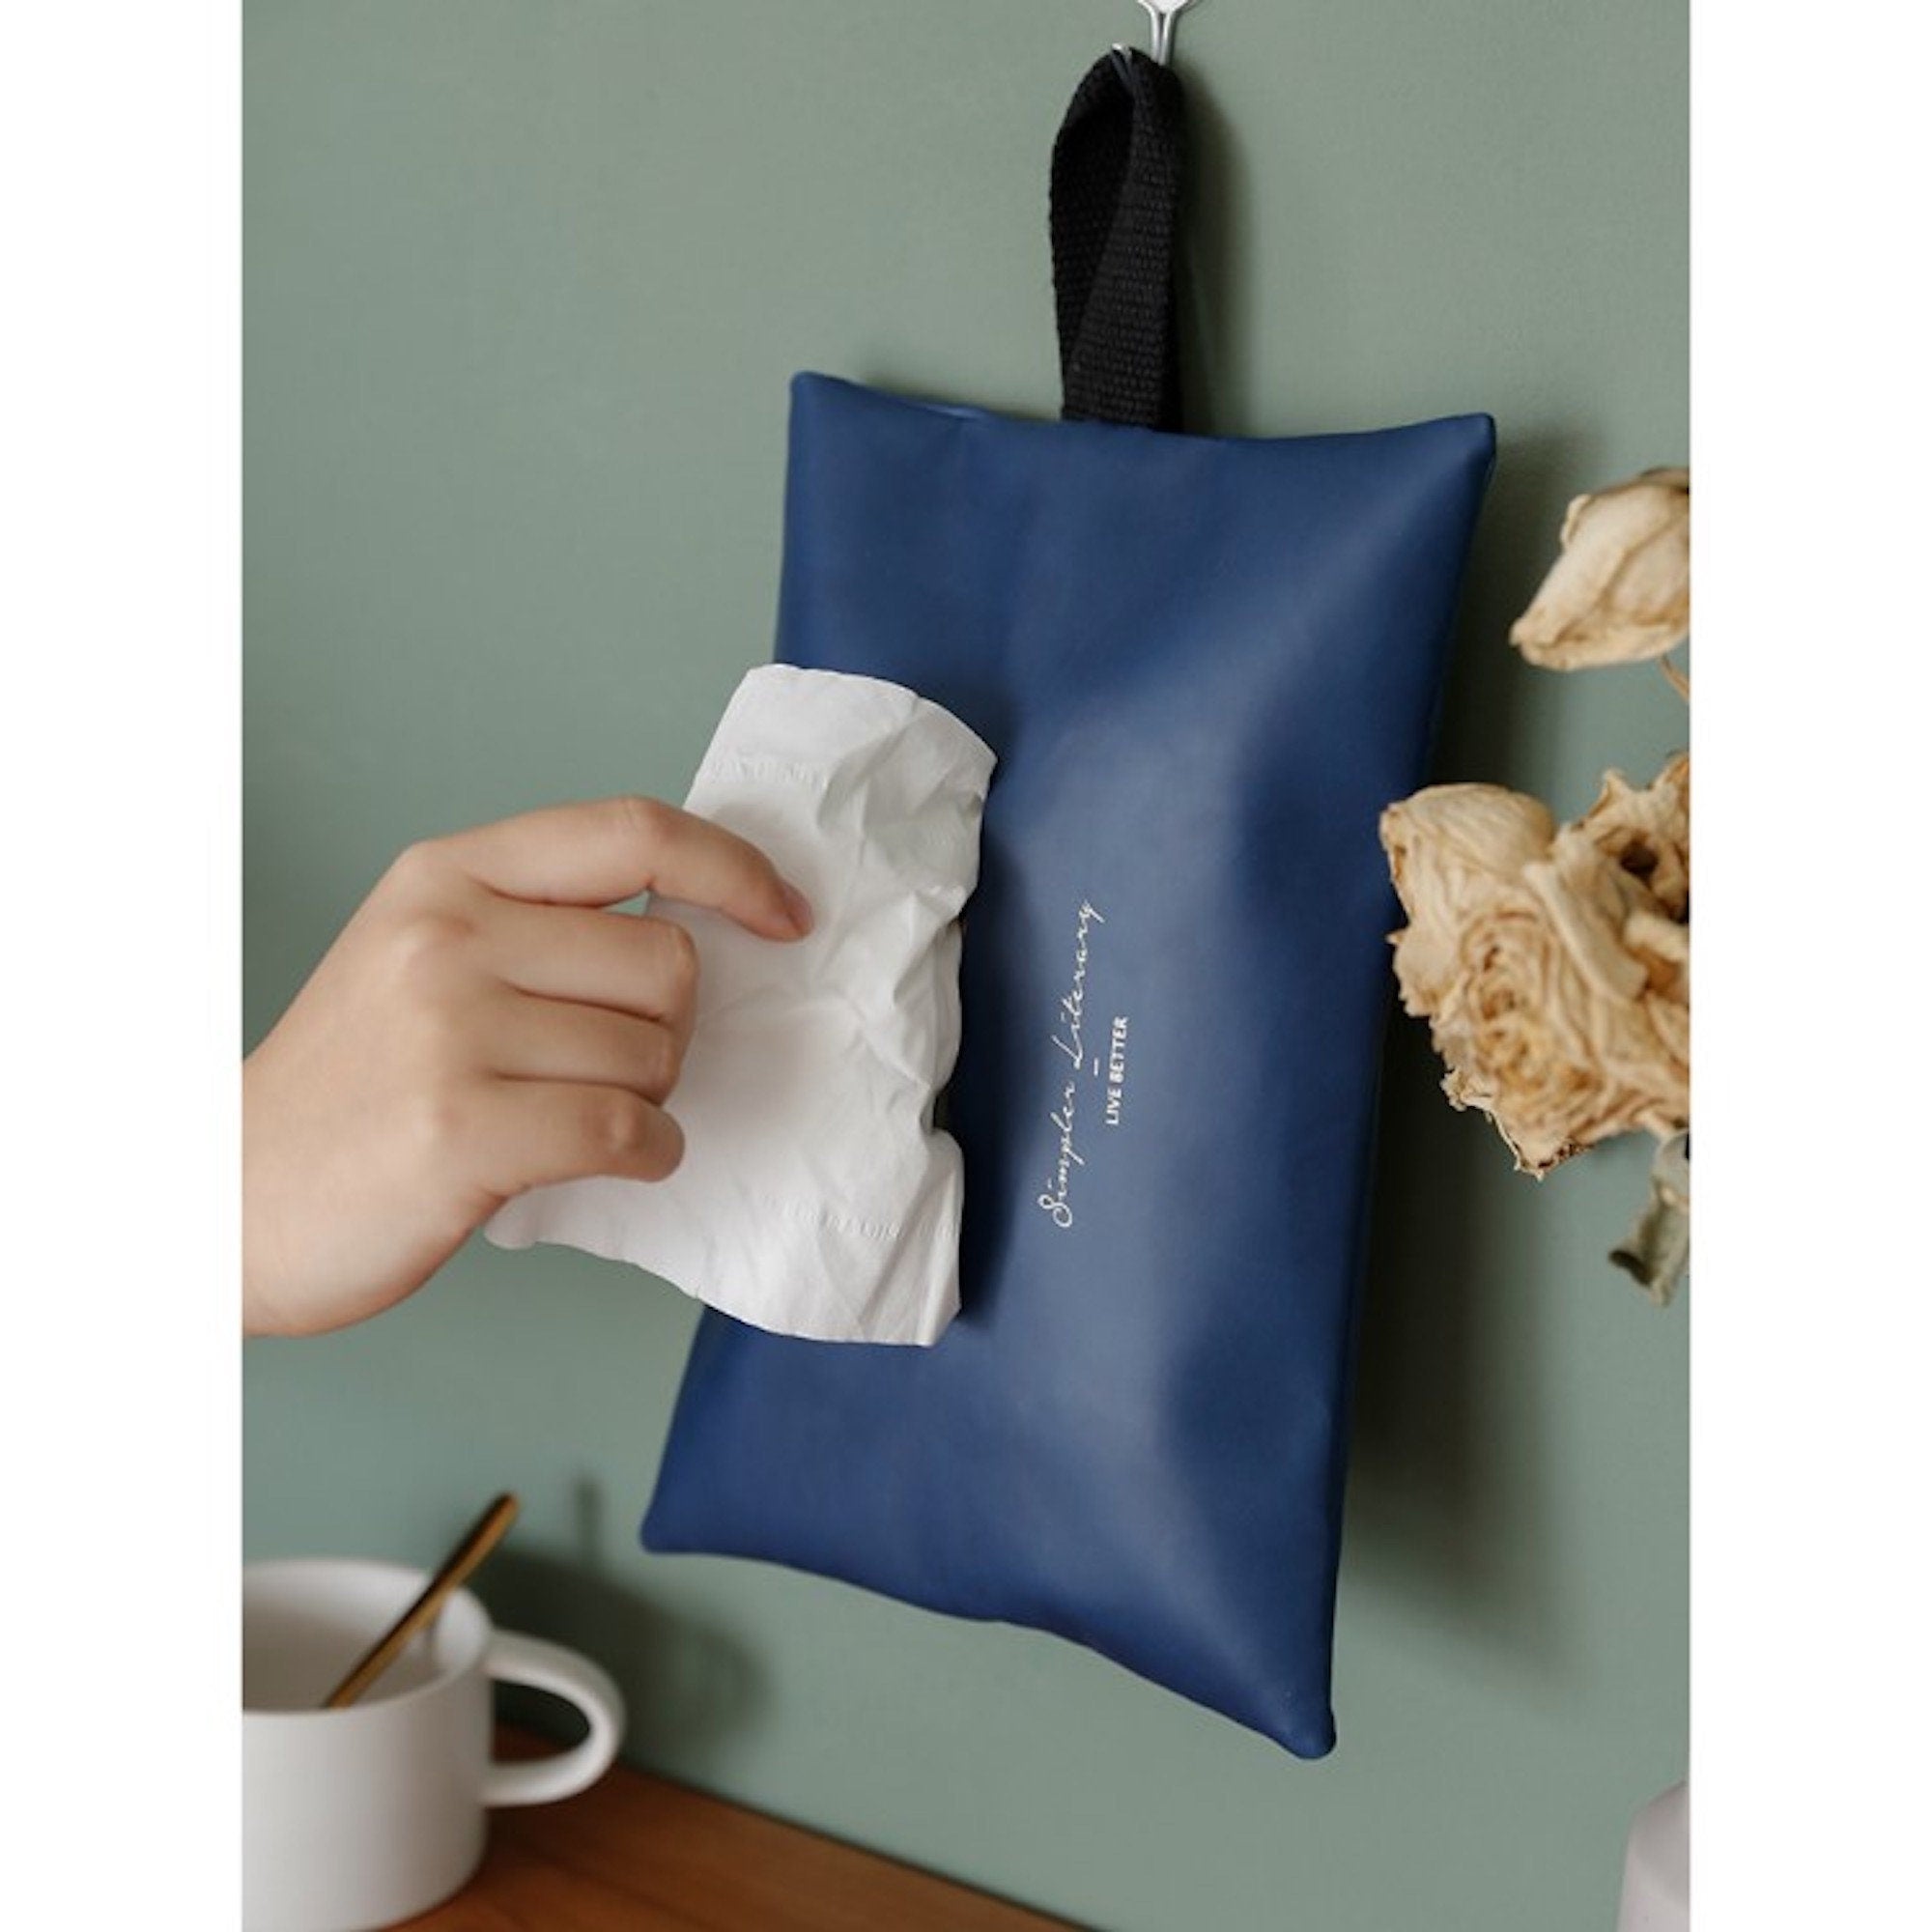 Large Tissue Box Holder Nordic Style PU Leather with Adjustment Belt for Car Seat Attachment and Wall Hanging Use At Home or in The Car  14.99 Indigo Paisley